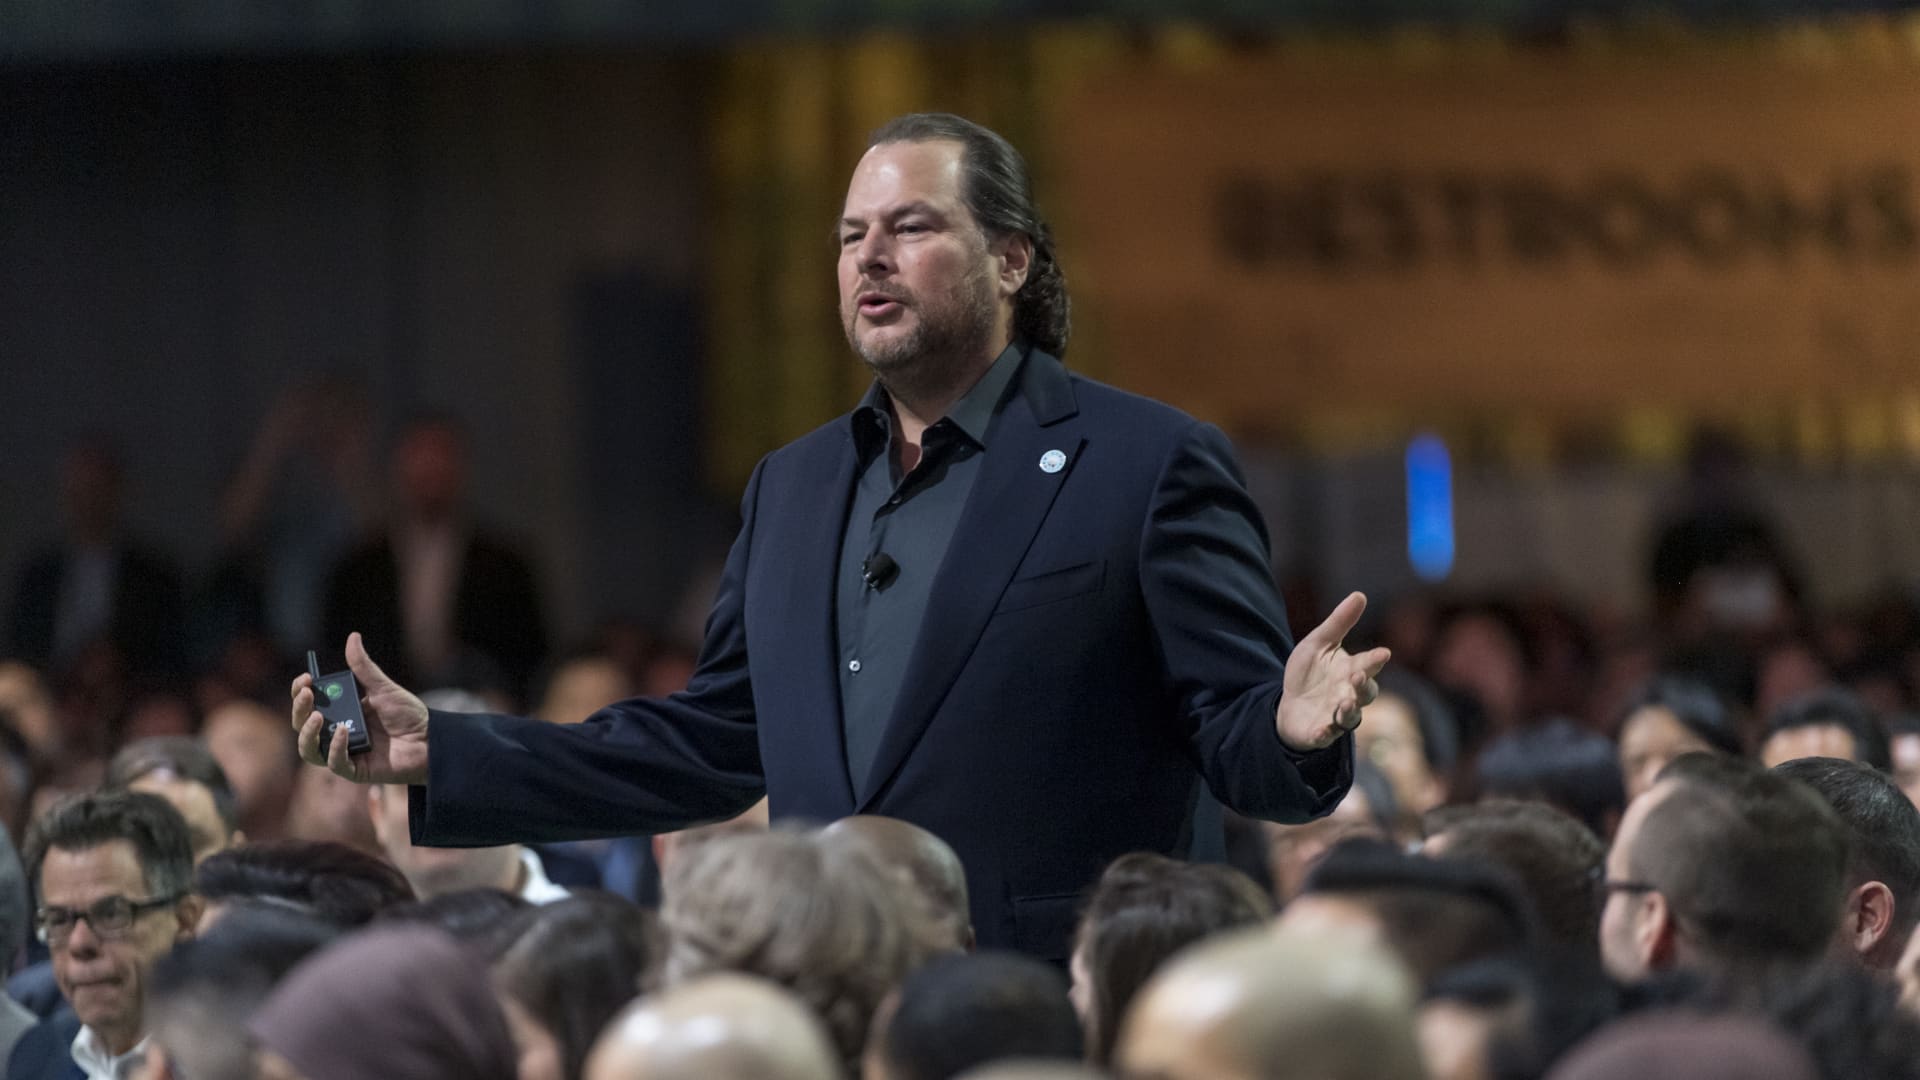 Marc Benioff, chairman and co-chief executive officer of Salesforce.com Inc., speaks during the opening keynote of the 2019 DreamForce conference in San Francisco on Nov. 19, 2019. Salesforce.com Inc.s annual software conference, where it introduces new products and discusses its commitment to social causes, was interrupted for the second year in a row by protests against the company's work with the U.S. government.